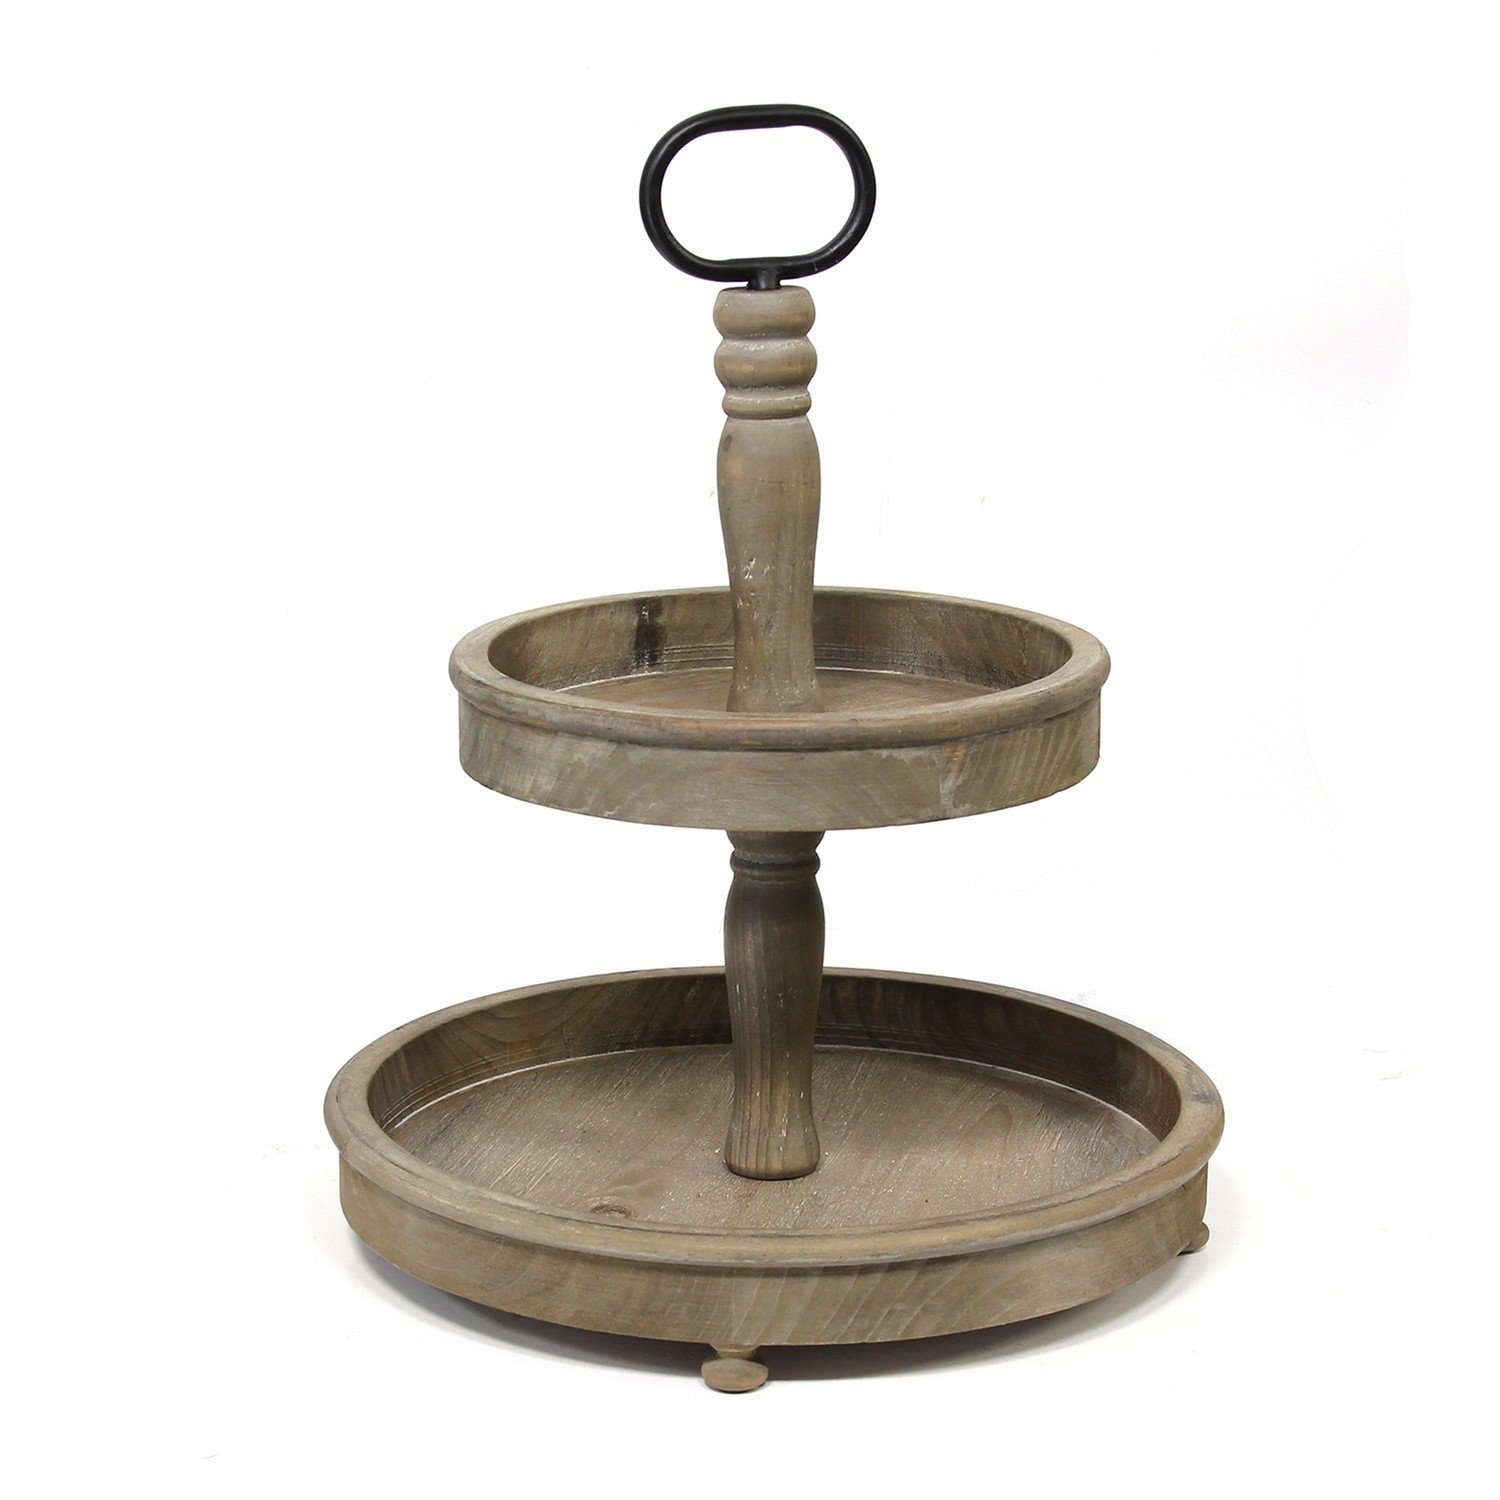 Two-Tier Decorative Wood Stand w/ Metal Handle